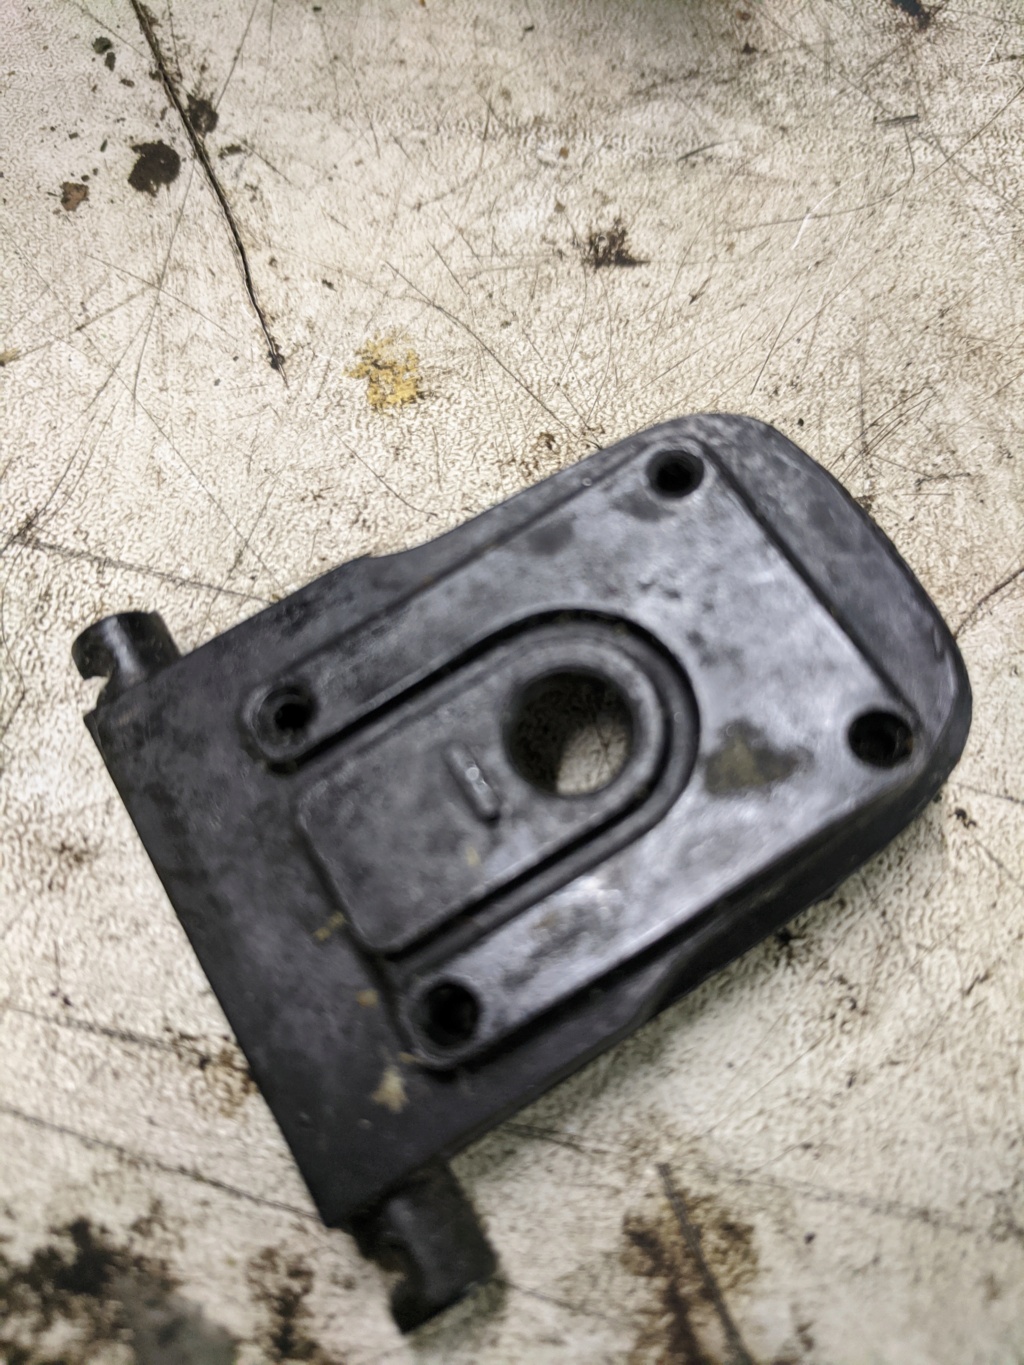 whats this gizmo then? Engine mount from toy? Cox_th10